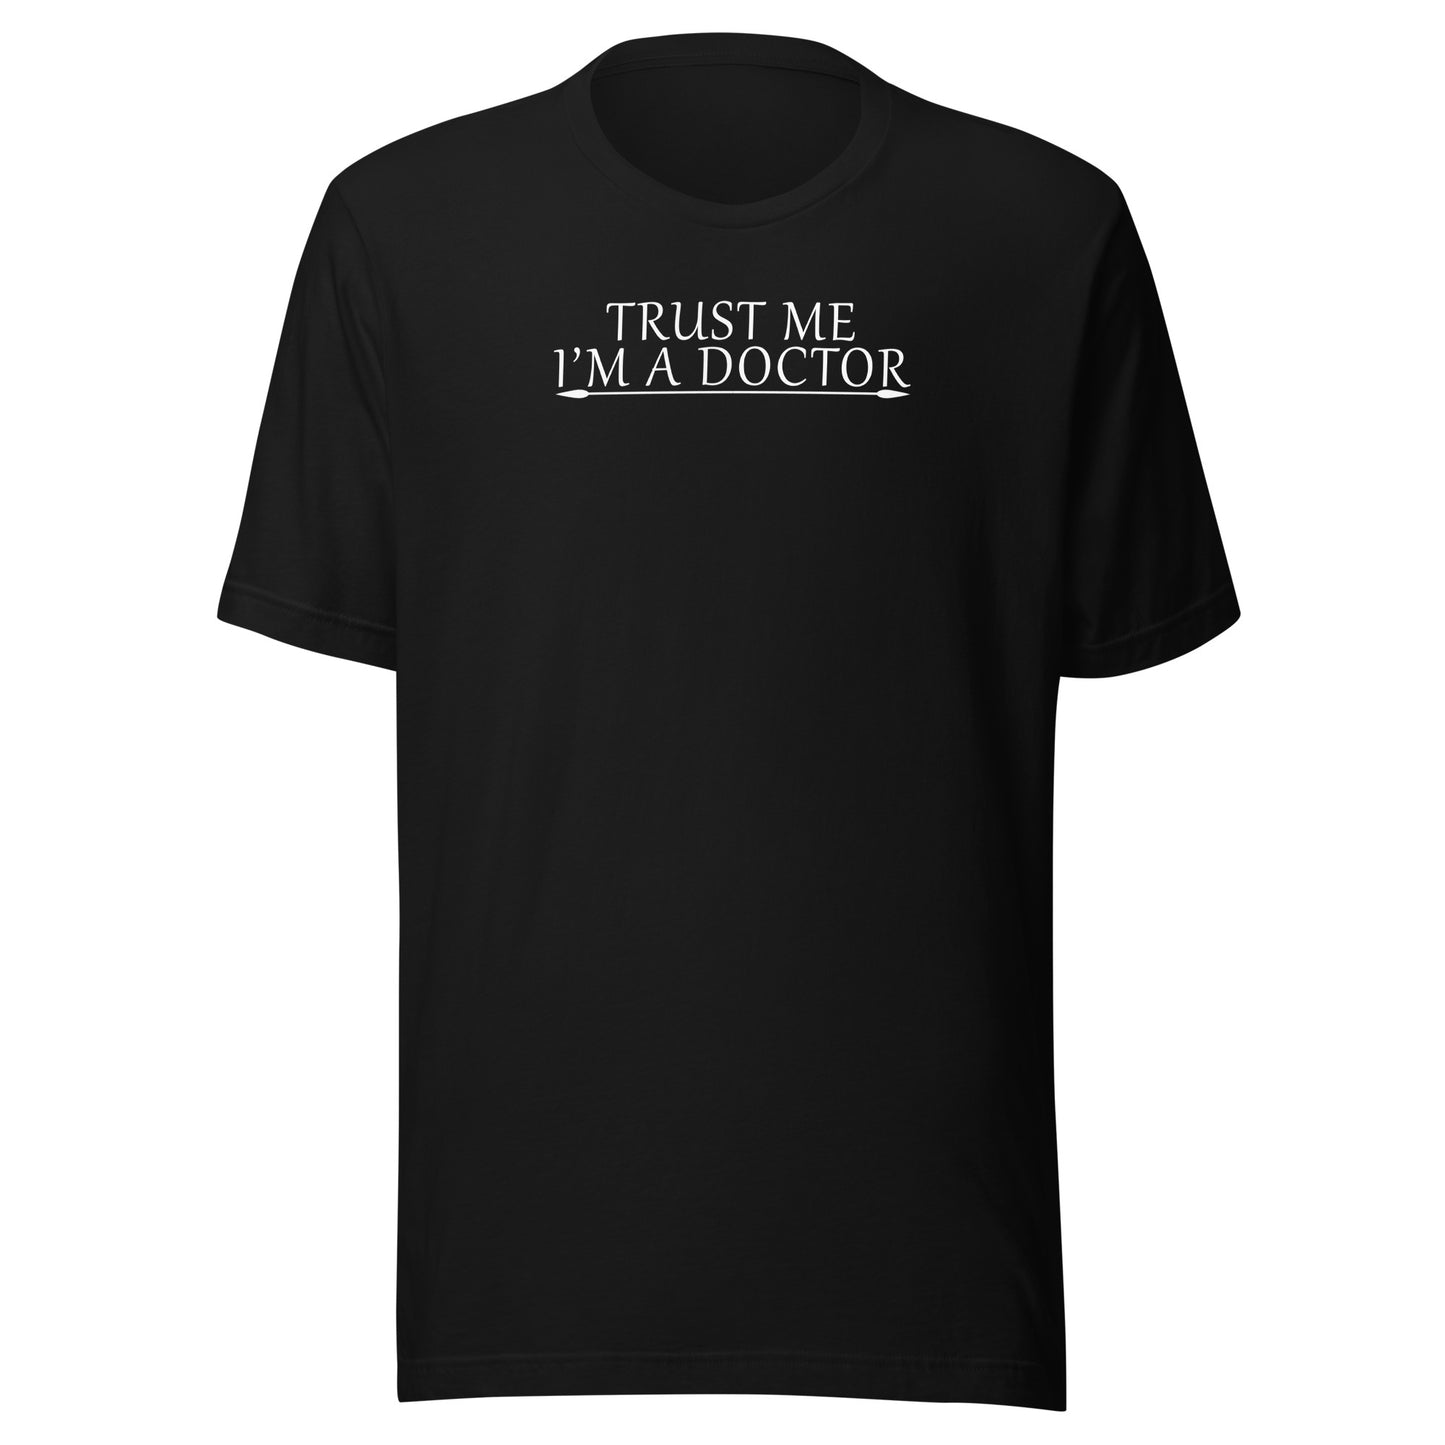 Trust Me I'm a Doctor T-shirts - Perfect for Medical Professionals